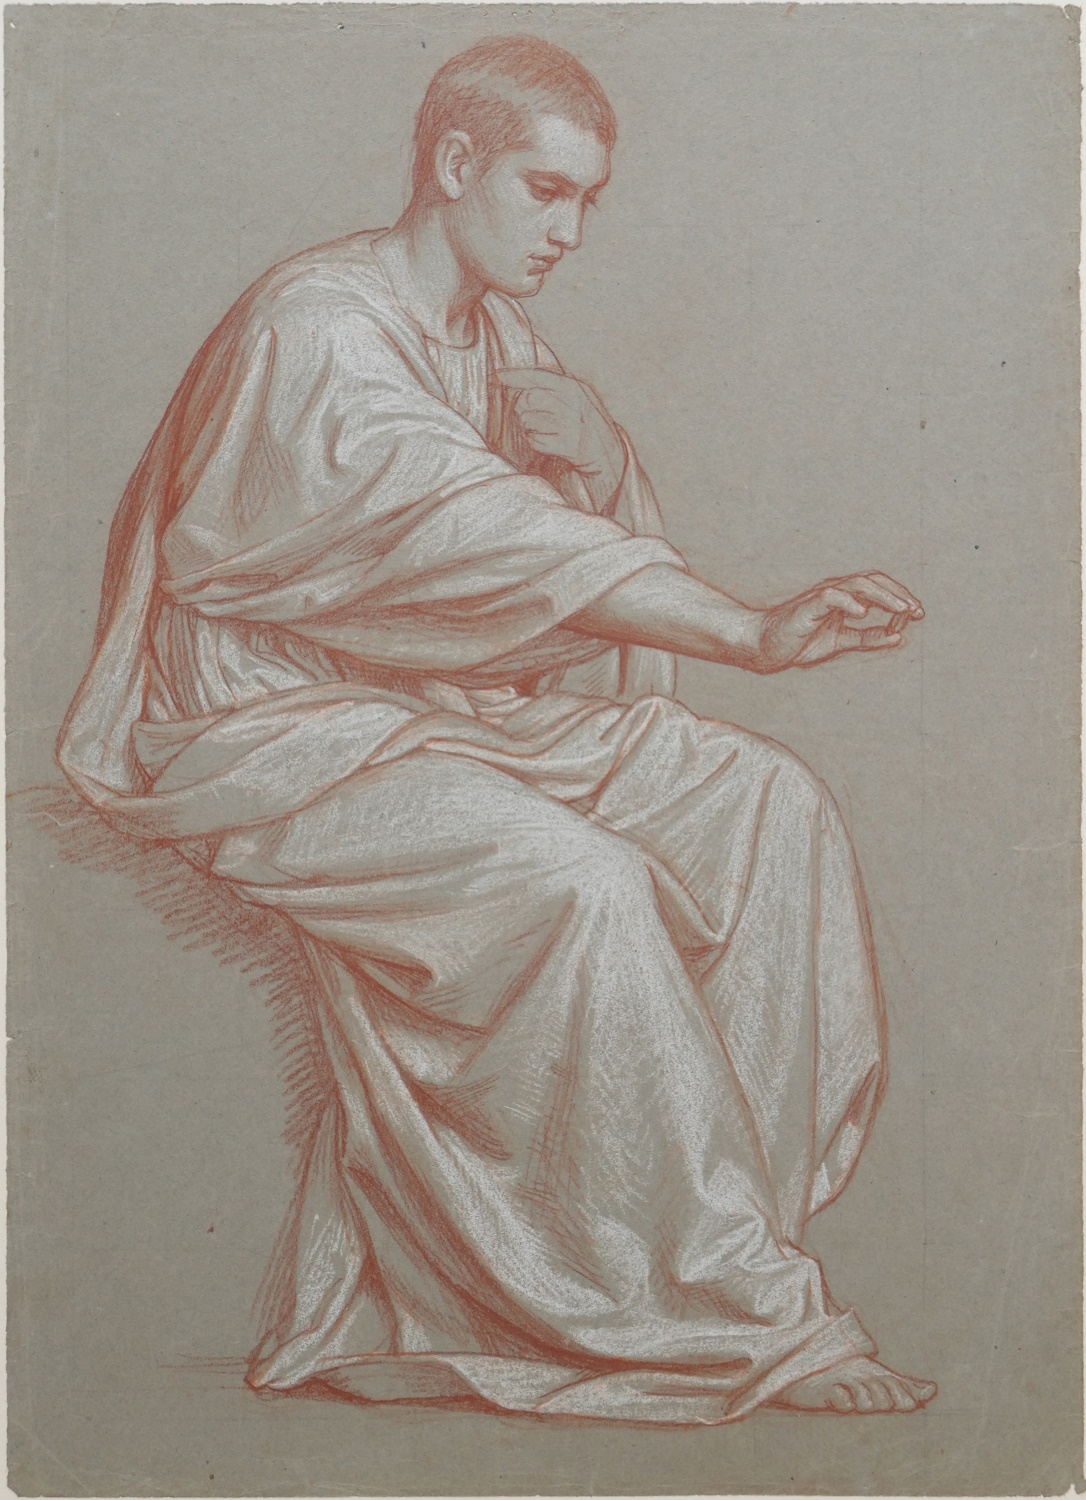 European School c.1860 – Study of a Seated Man with Right Arm Raised